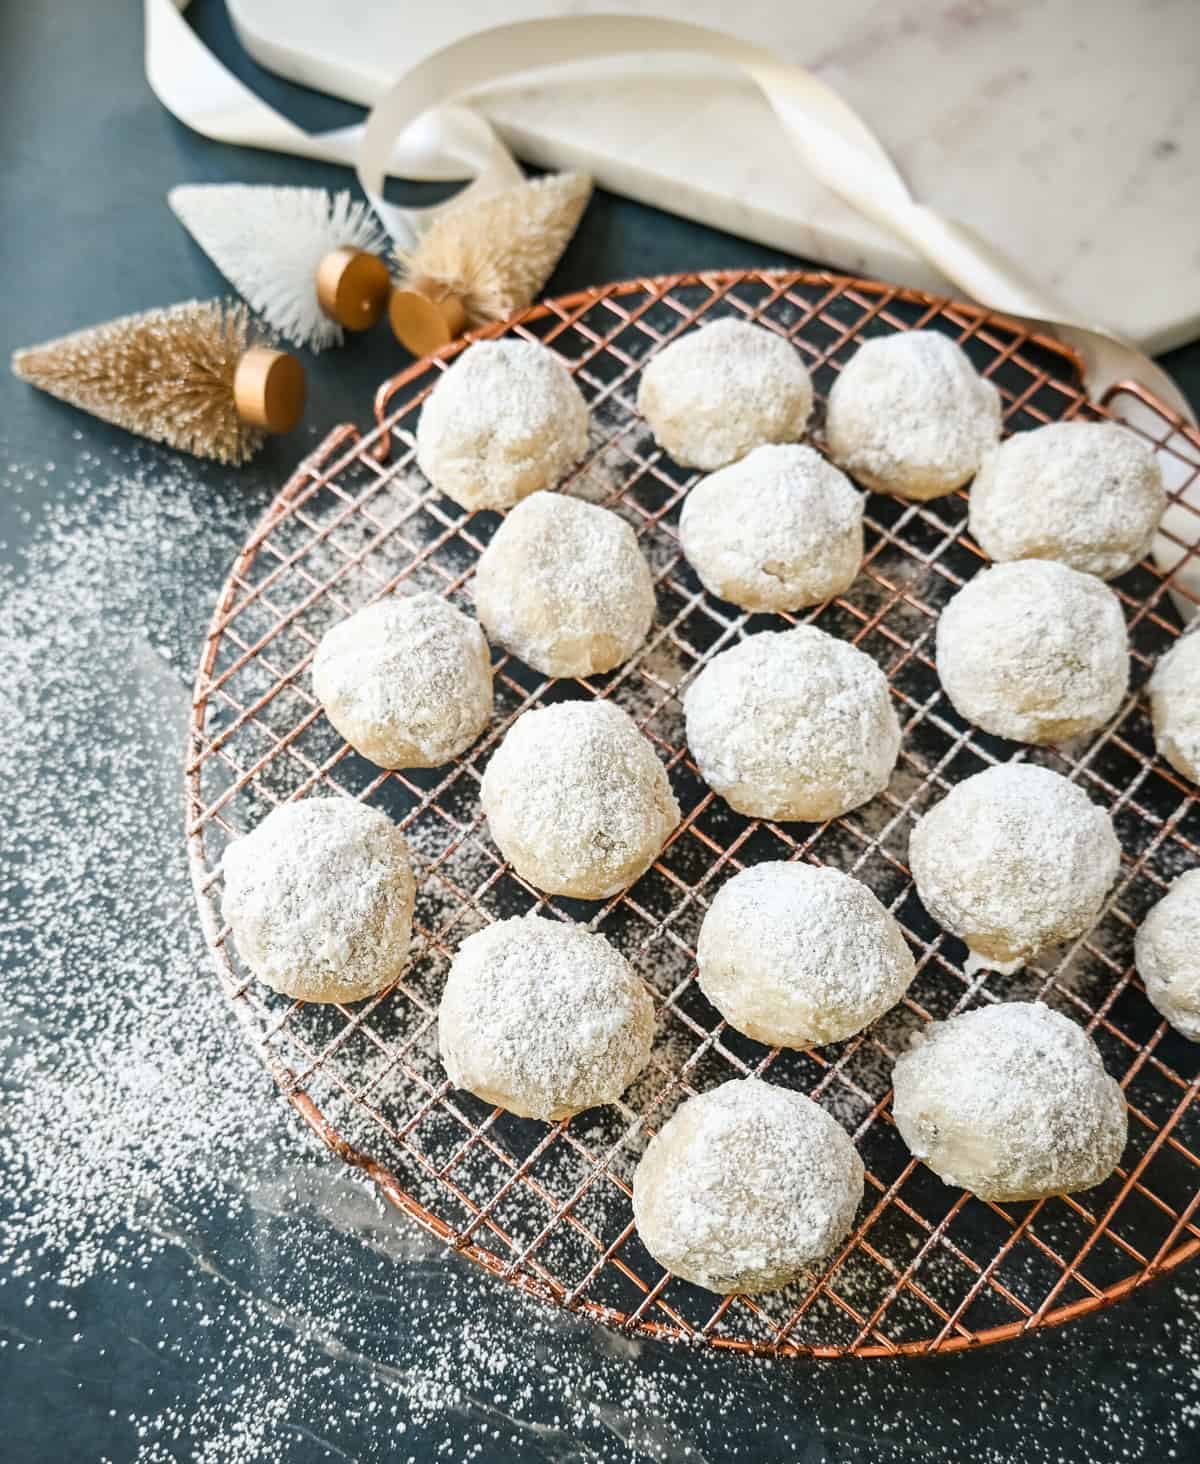 Mexican Wedding Cookies (Snowball Cookies). These buttery, nutty, Mexican wedding cookies are so easy to make and call for only 5 ingredients. These melt-in-your-mouth cookies are perfect to make during the holidays and everyone loves them. The perfect Christmas cookie recipe. 